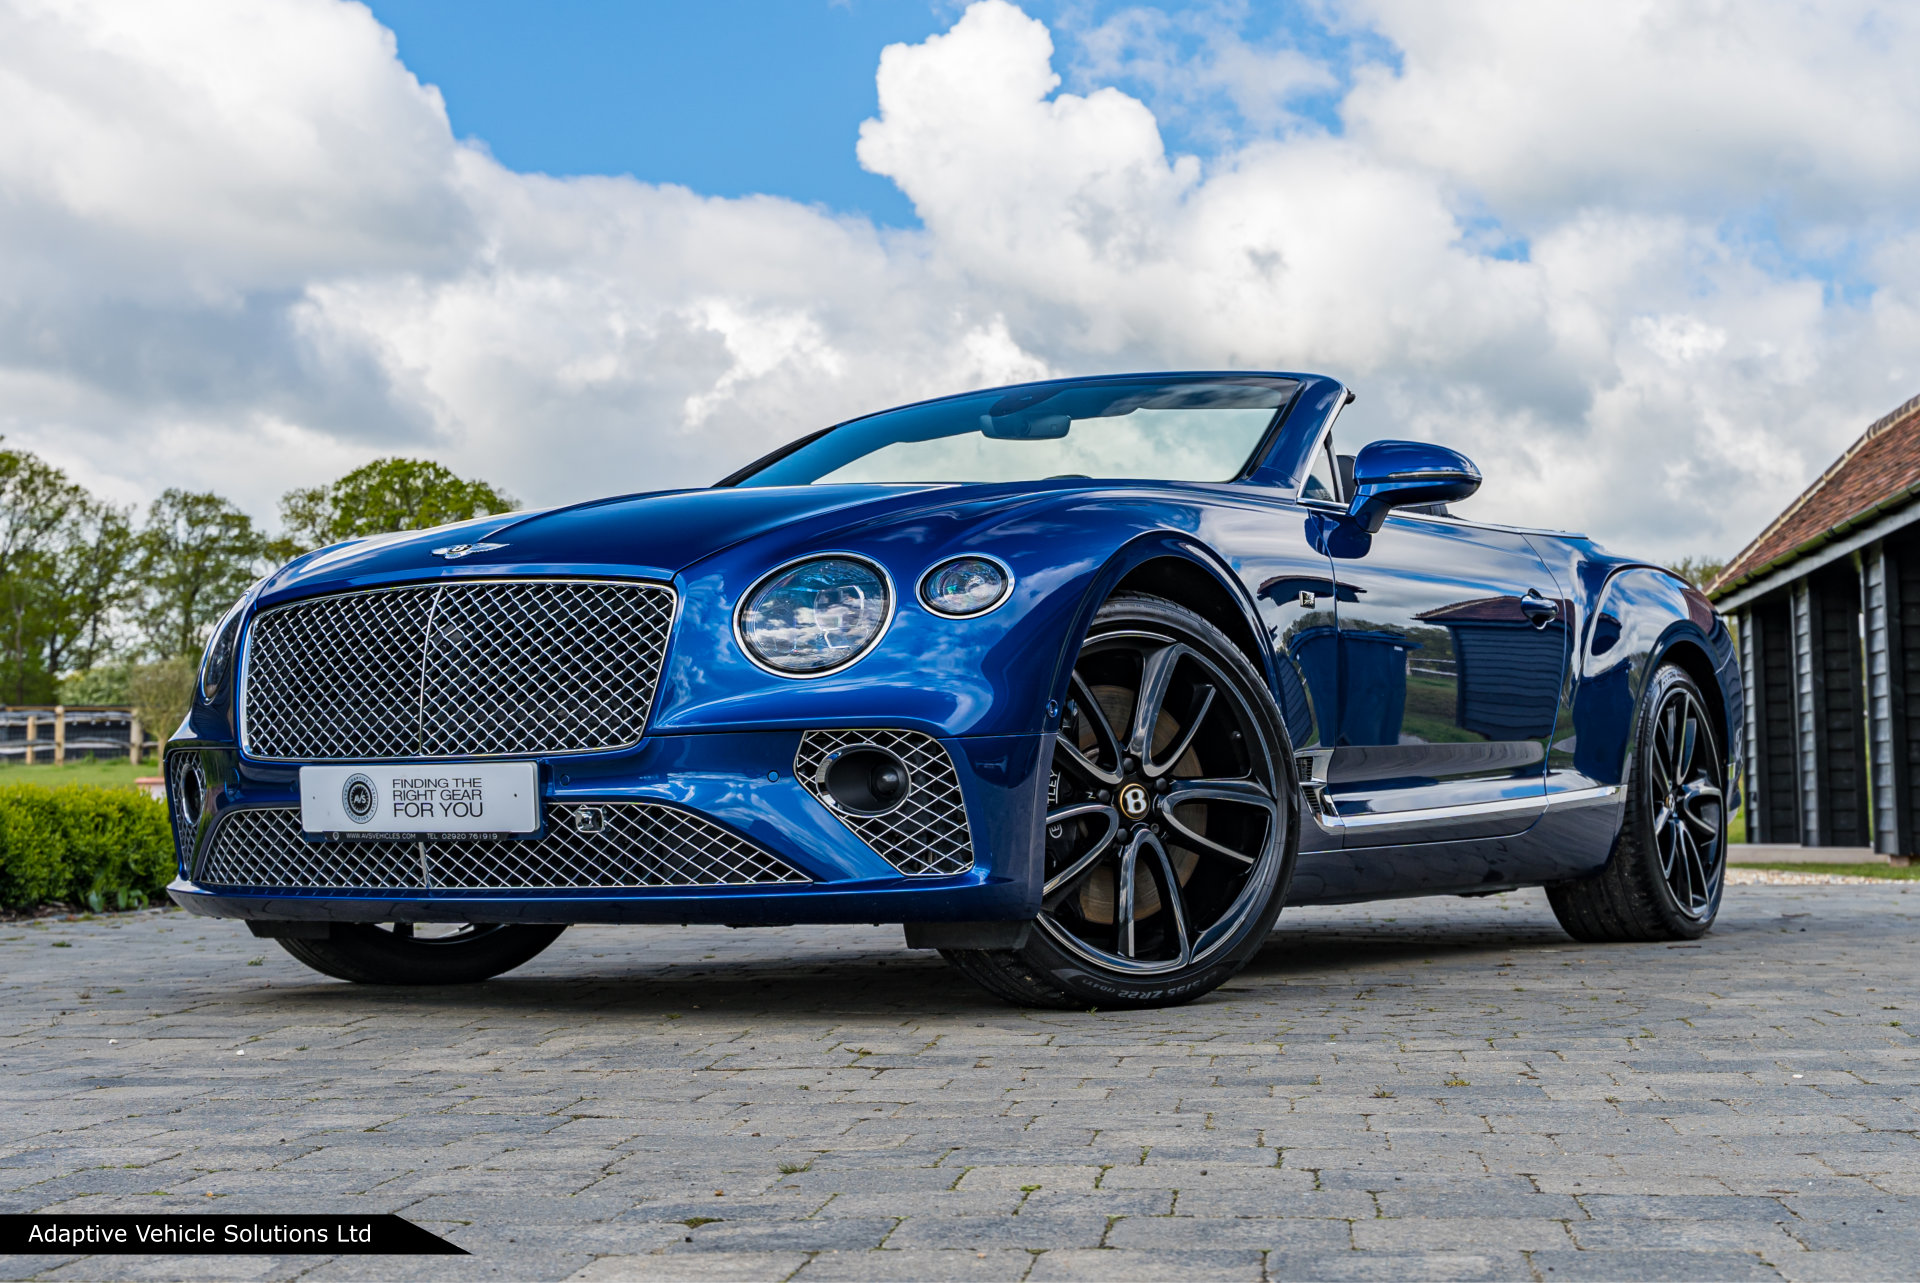 2019 Bentley Continental GTC First Edition near side front view